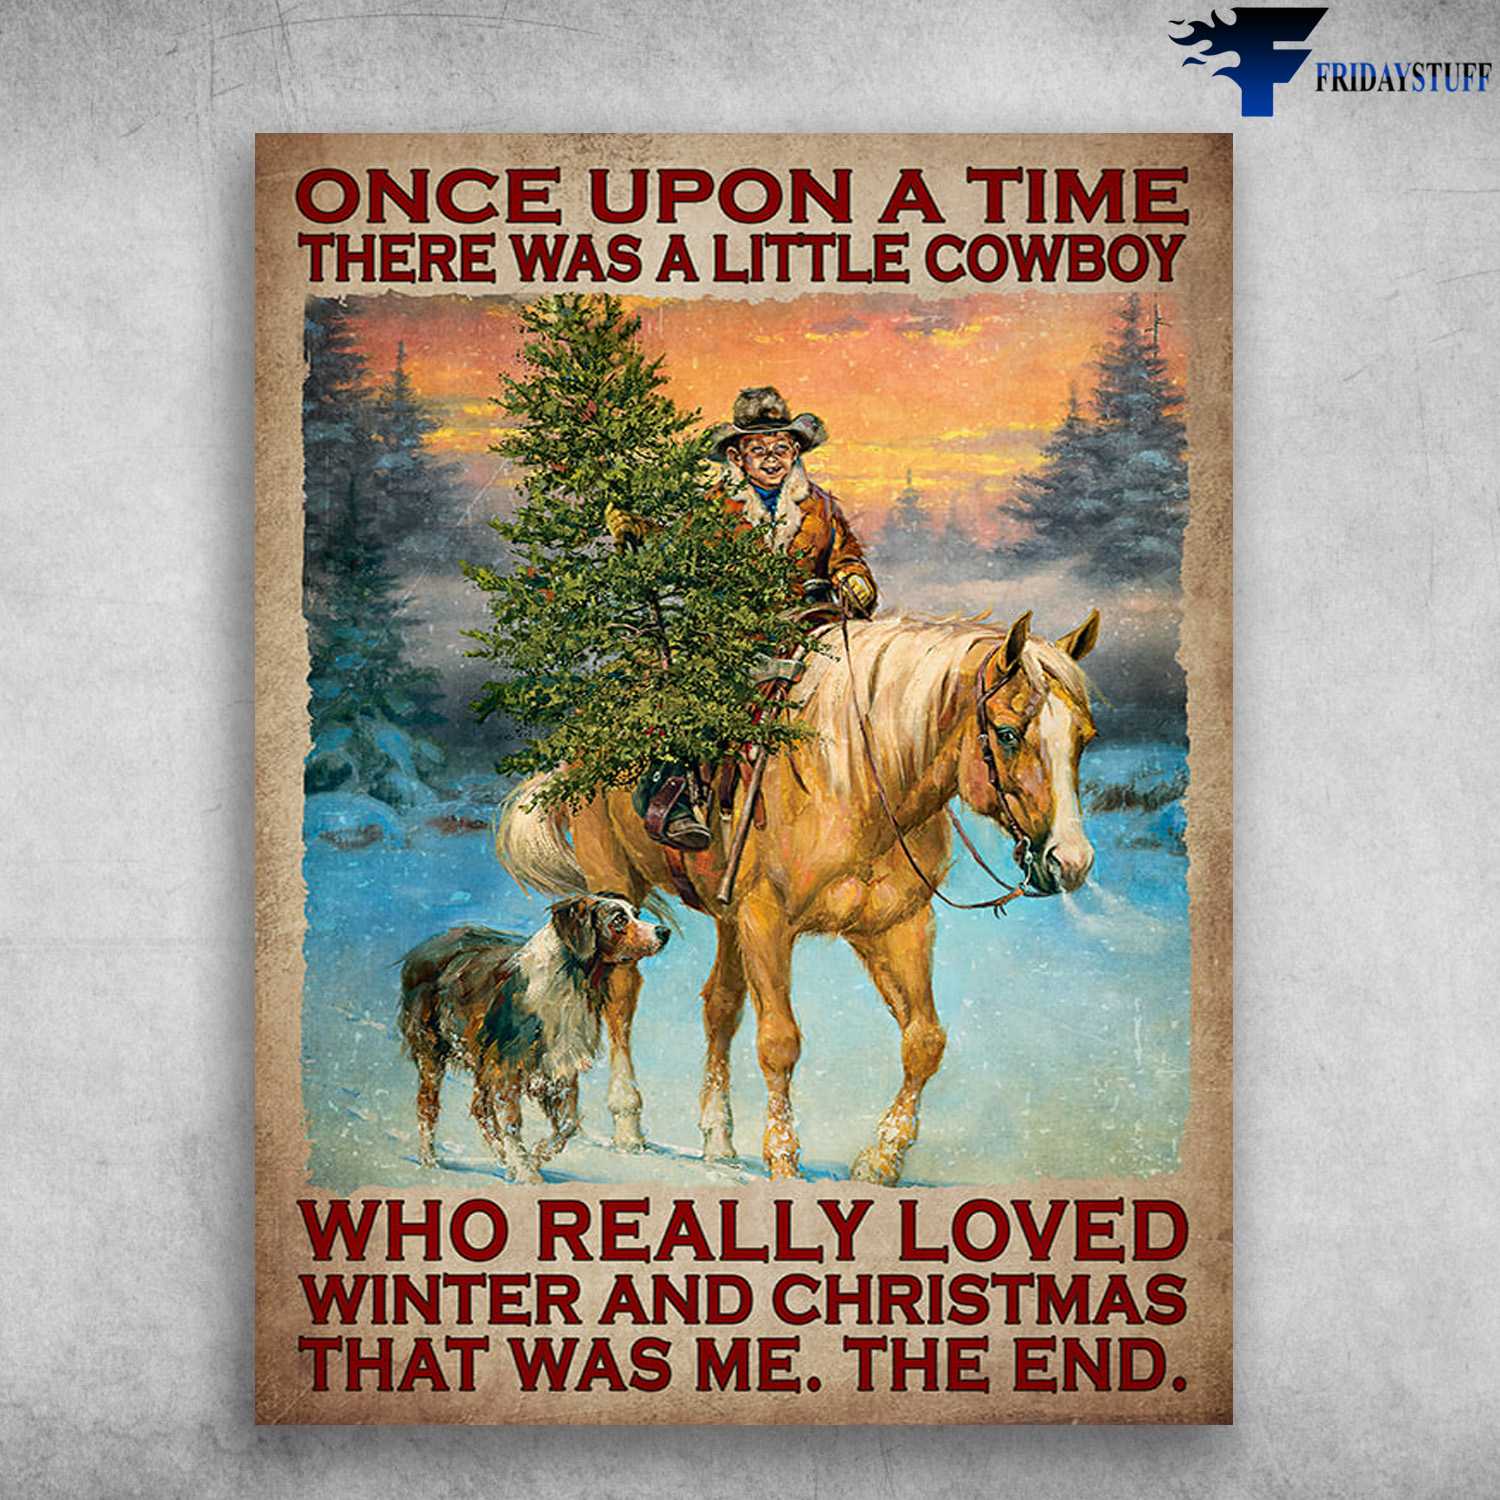 Horse Riding, Dog Lover, Cowboy Christmas - Once Upon A Time There Was A Little Cowboy, Who Really Loved Winter And Christmas, That Was Me, The End